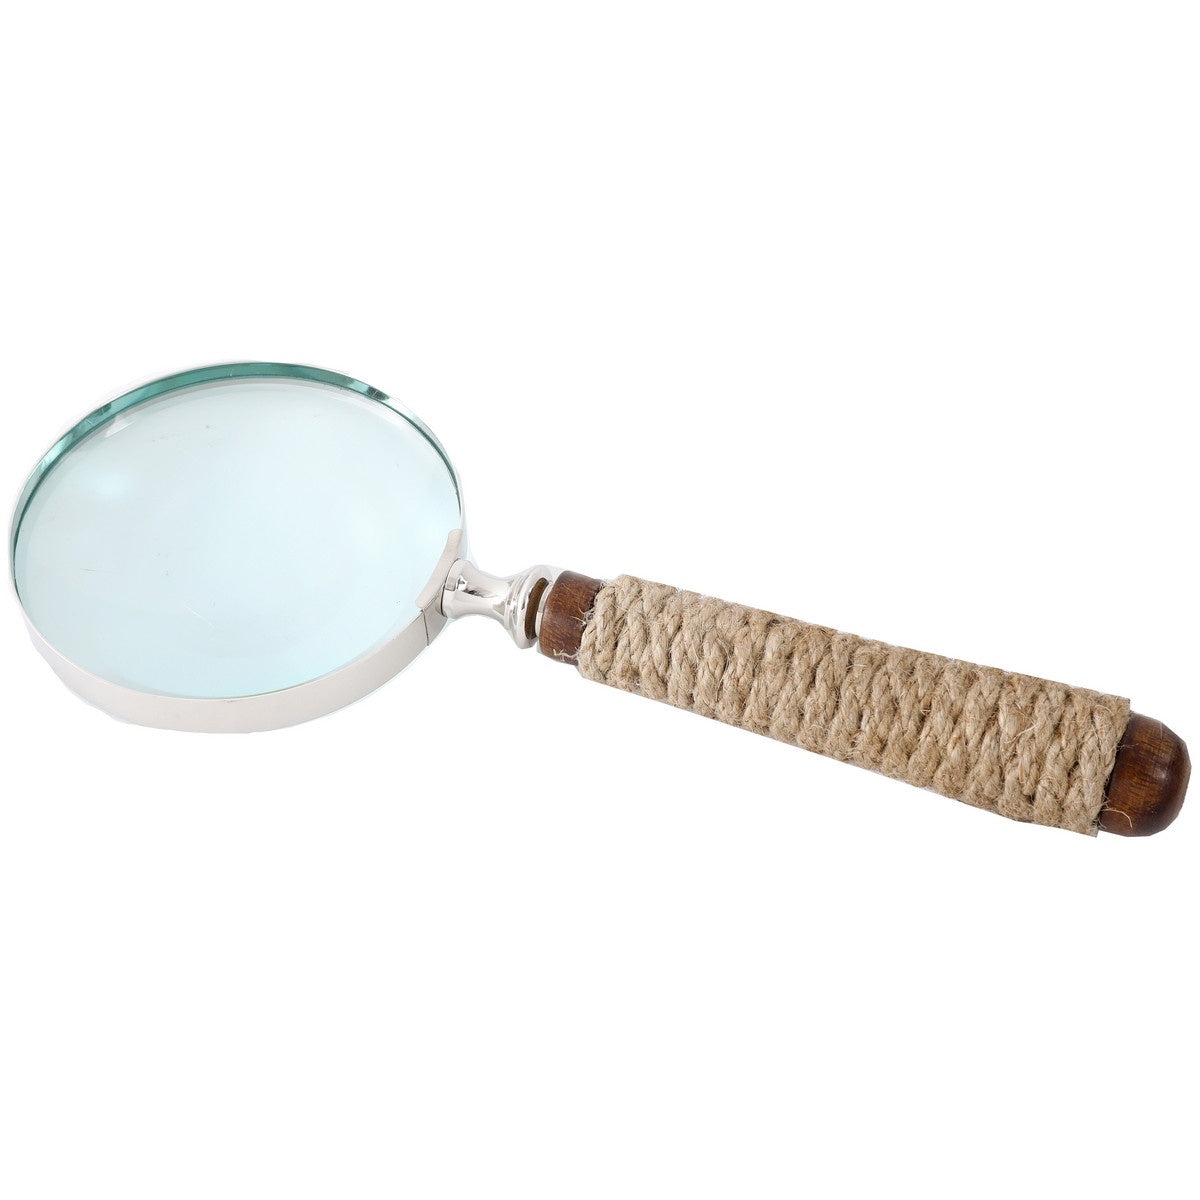 Magnifying - rope handle